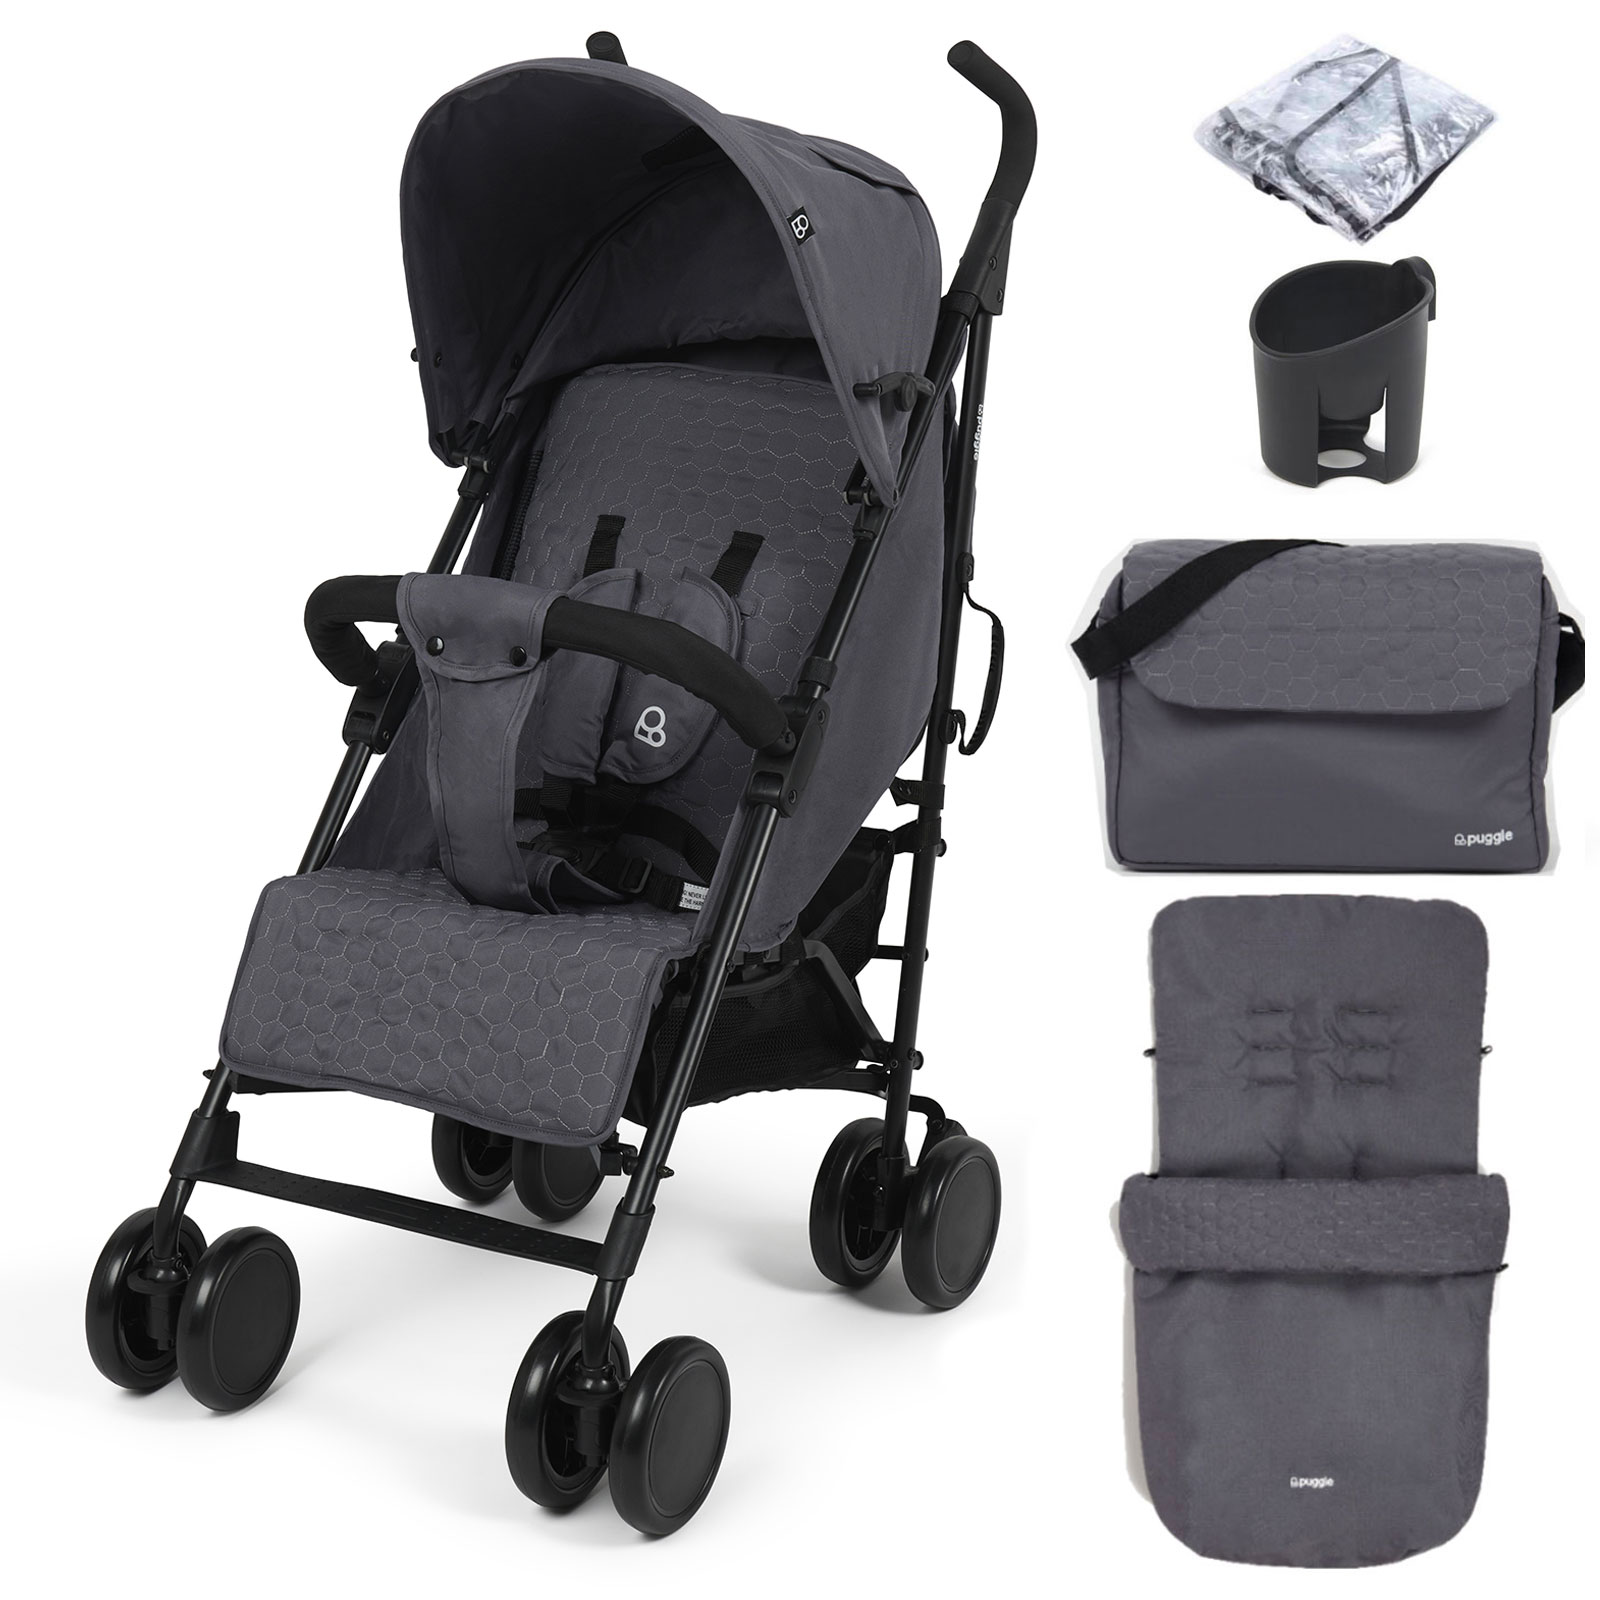 Puggle Litemax Pushchair Stroller with Raincover, Cupholder, Universal Footmuff and Changing Bag with Mat - Slate Grey